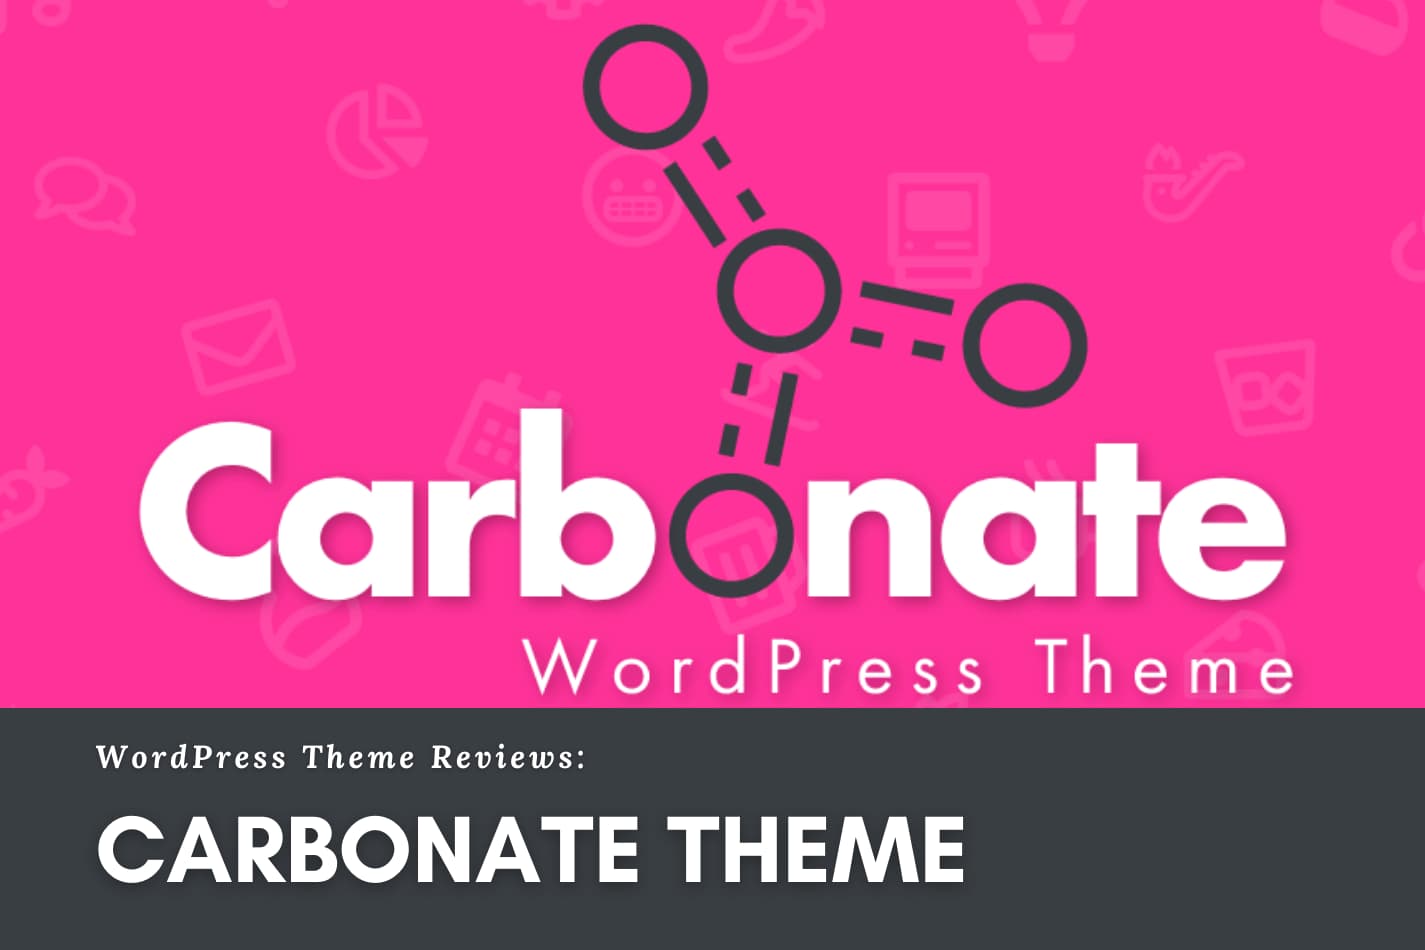 The fastest theme in WordPress - carbonate theme review